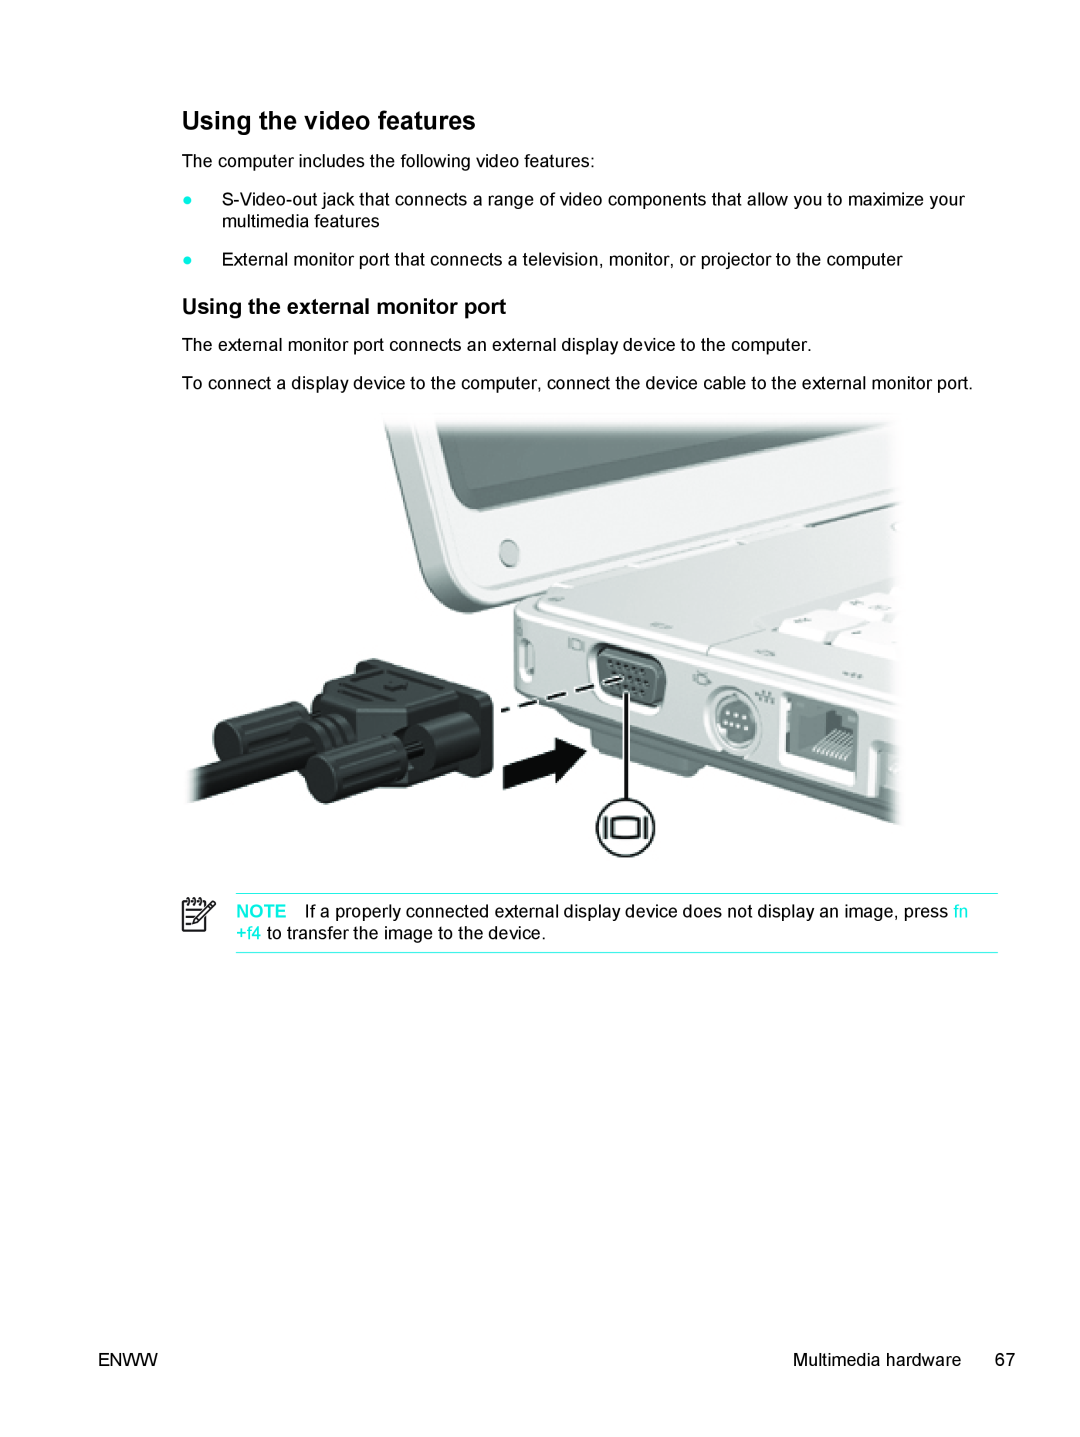 HP V5200, V5224TU, V5221TU, V5221EA, V5219TU, V5218TU, V5215LA, V5300 Using the video features, Using the external monitor port 